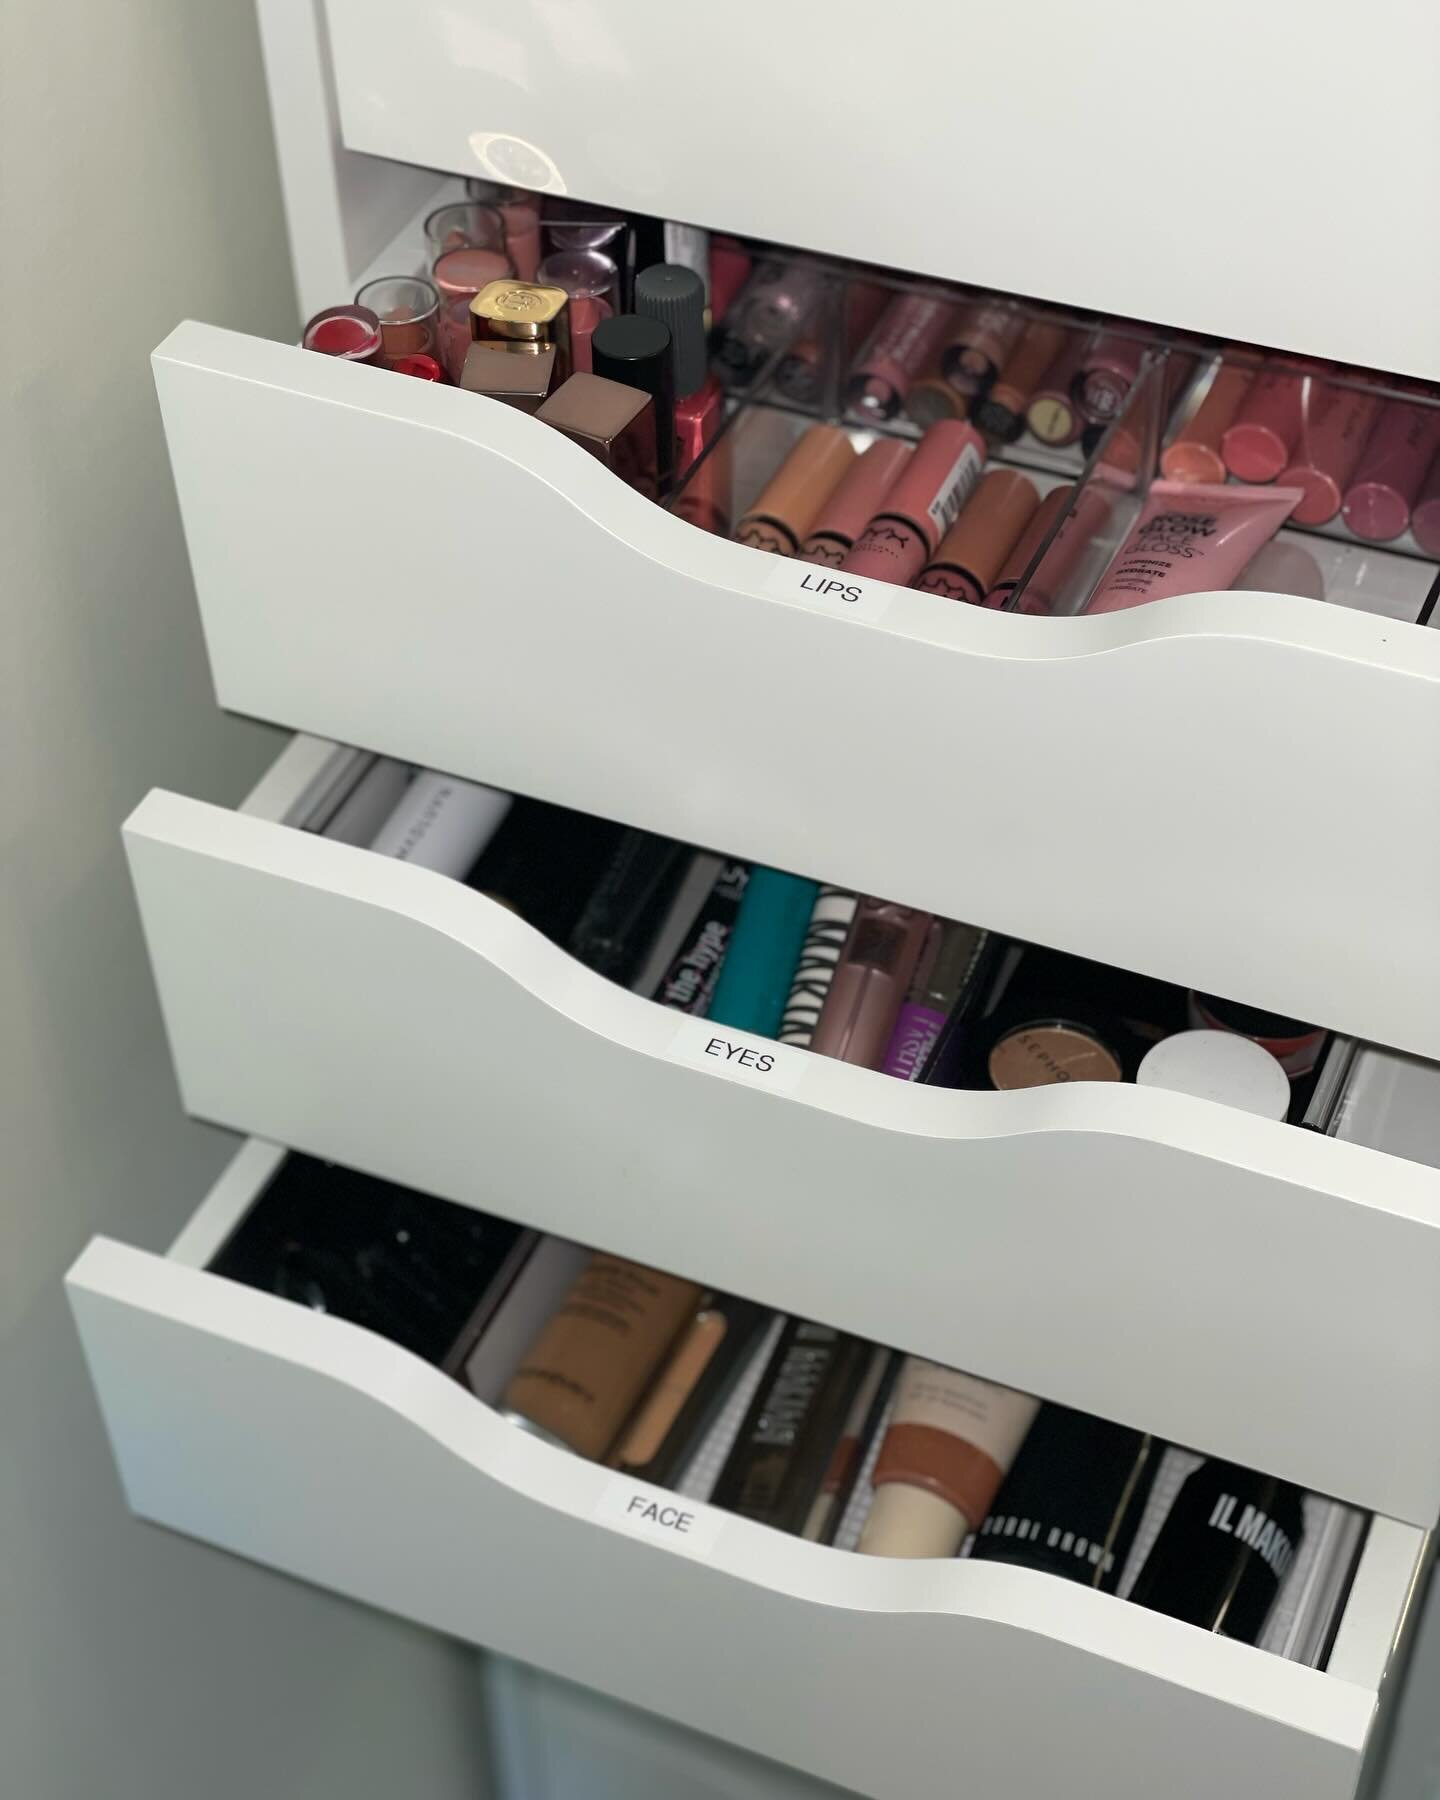 Need extra storage space for cosmetics and beauty products that don&rsquo;t break the bank? We love @ikeausa Alex Drawers and drawer organizers! Don&rsquo;t forget the label maker! 😍💄💋

#bathroomorganization #organizedhome #organizedliving #bathro